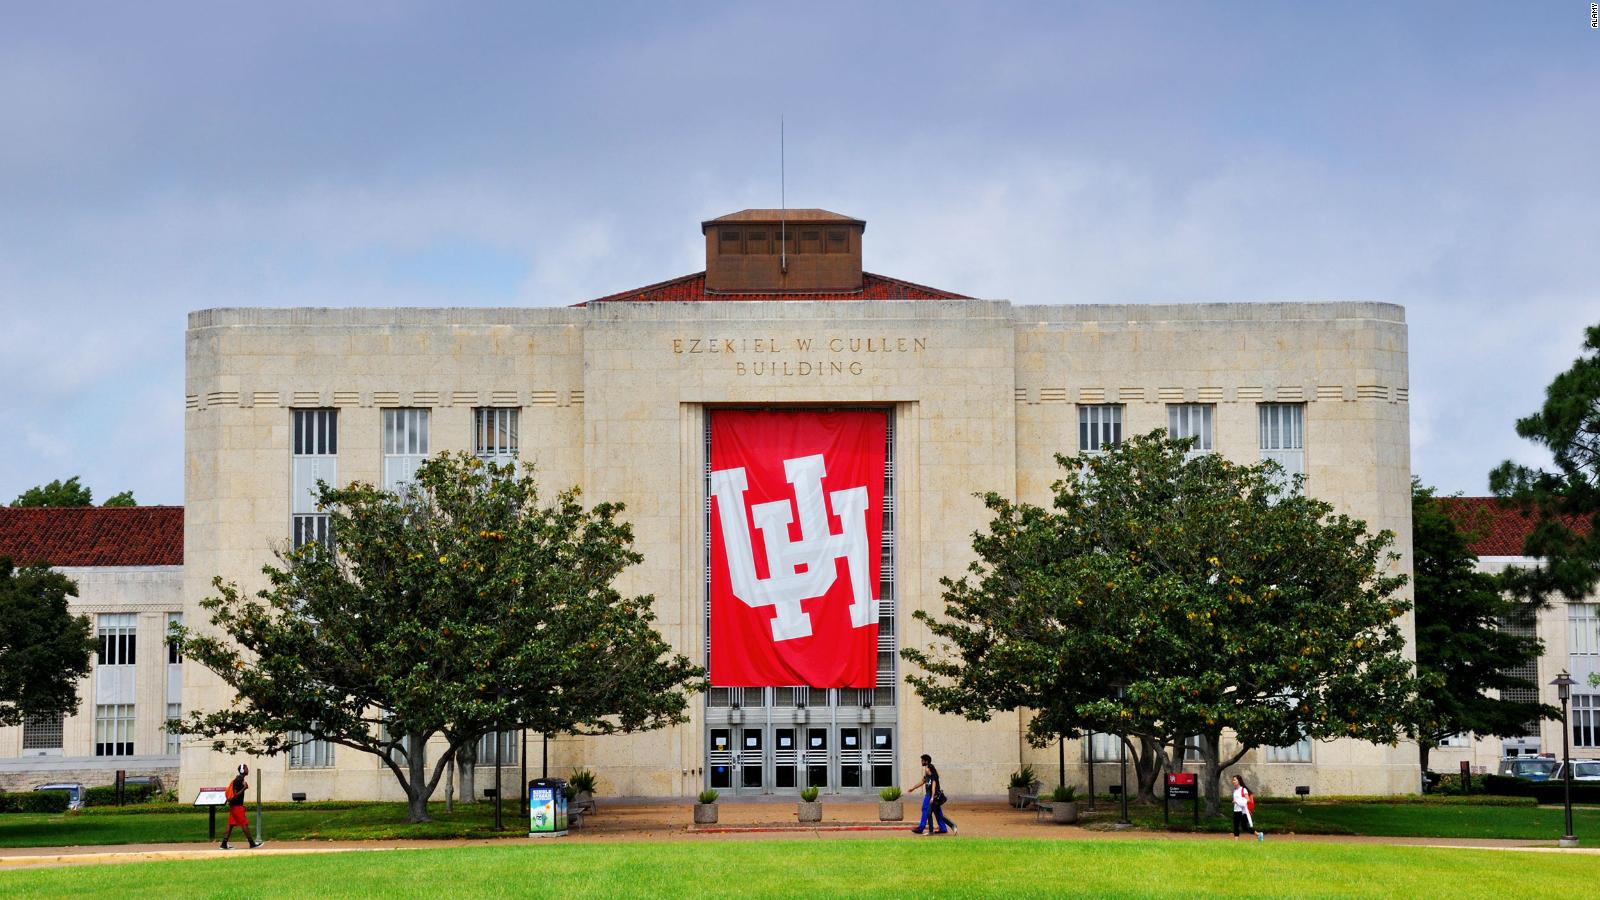 University of Houston is waiving tuition for students whose families